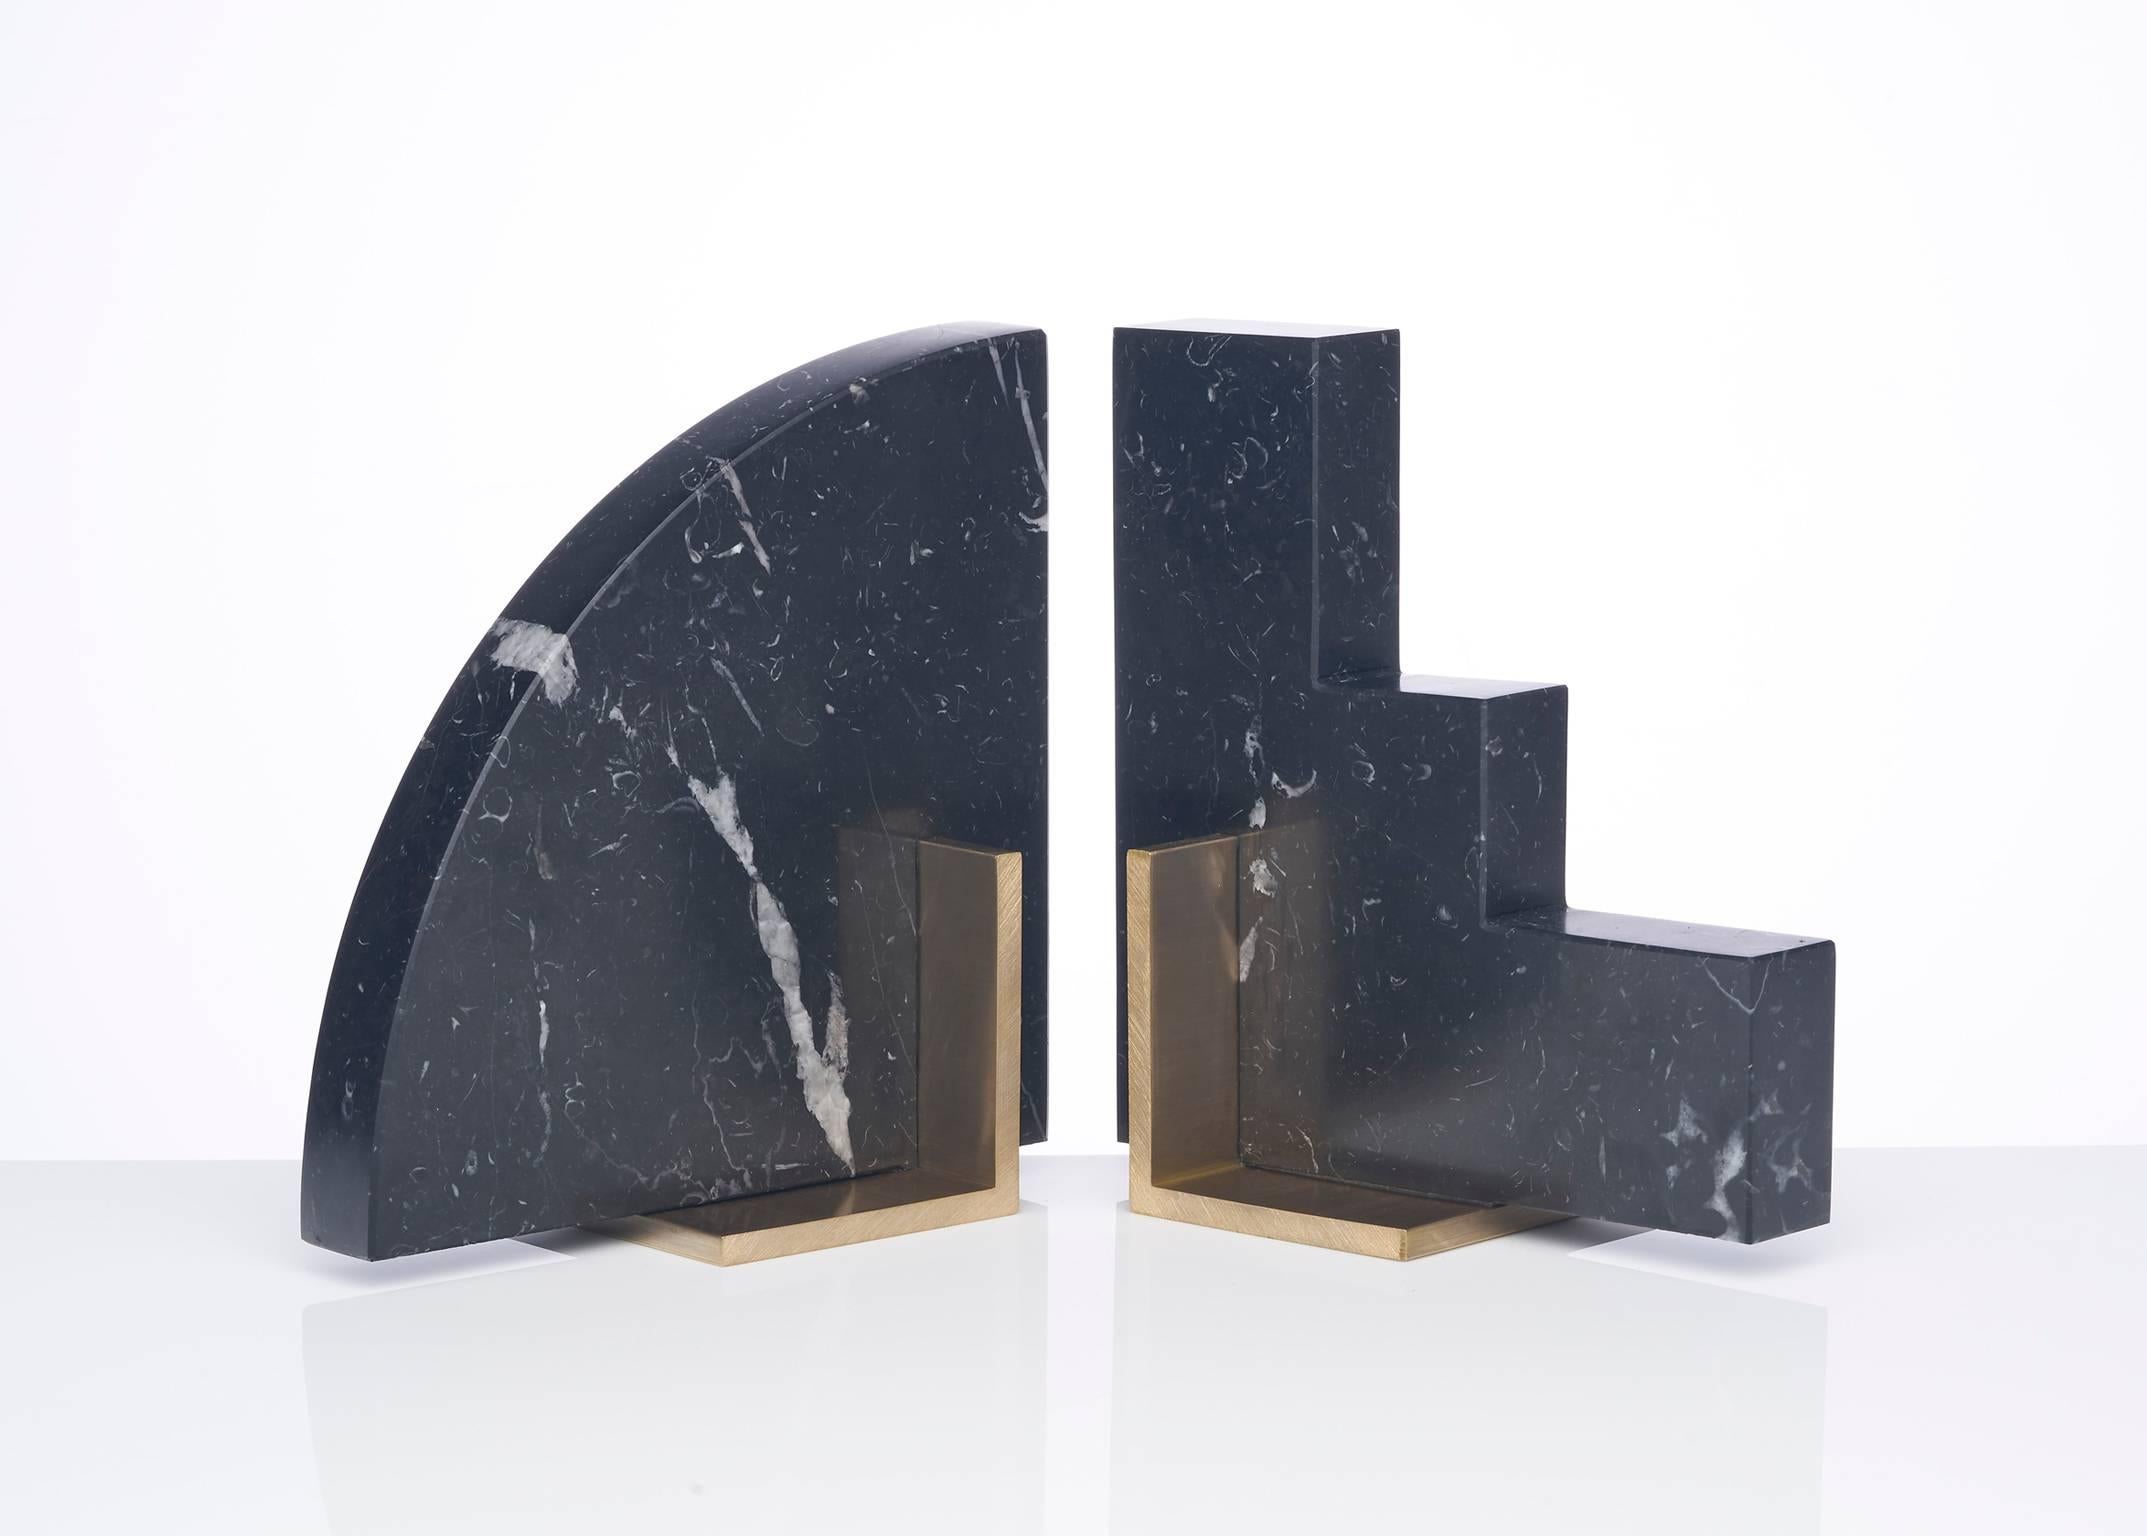 Meet Curvy and Steppy; the two individual bookends which as a pair are known as the Odd Couple bookends. 
Here shown in a honed Nero Marquinia marble and a brushed brass base.
Nero Marquinia marble from Spain is cut into two geometric shapes and